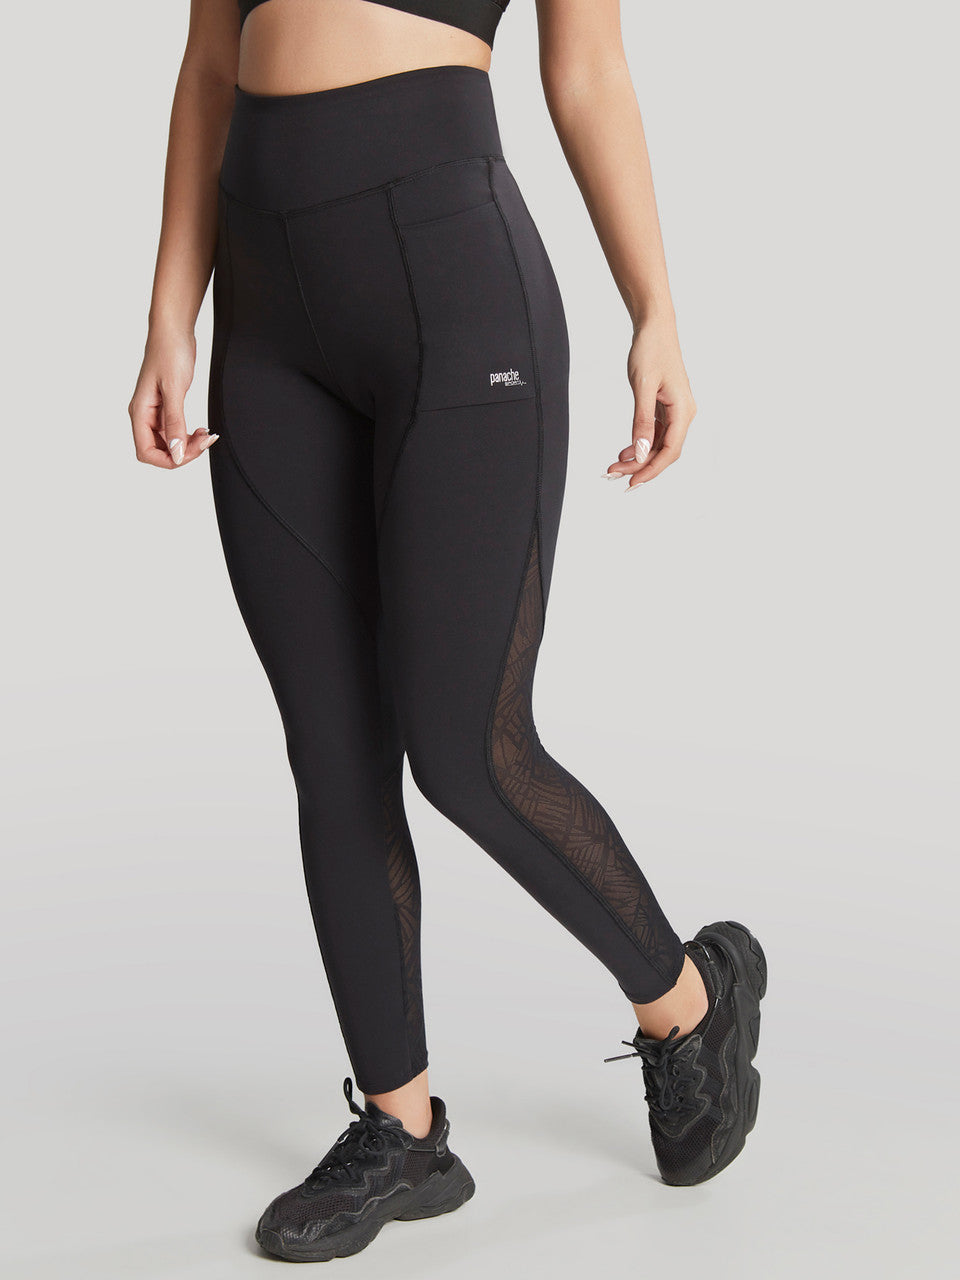 Ultra Adapt Sports Legging - Black worn by model front view